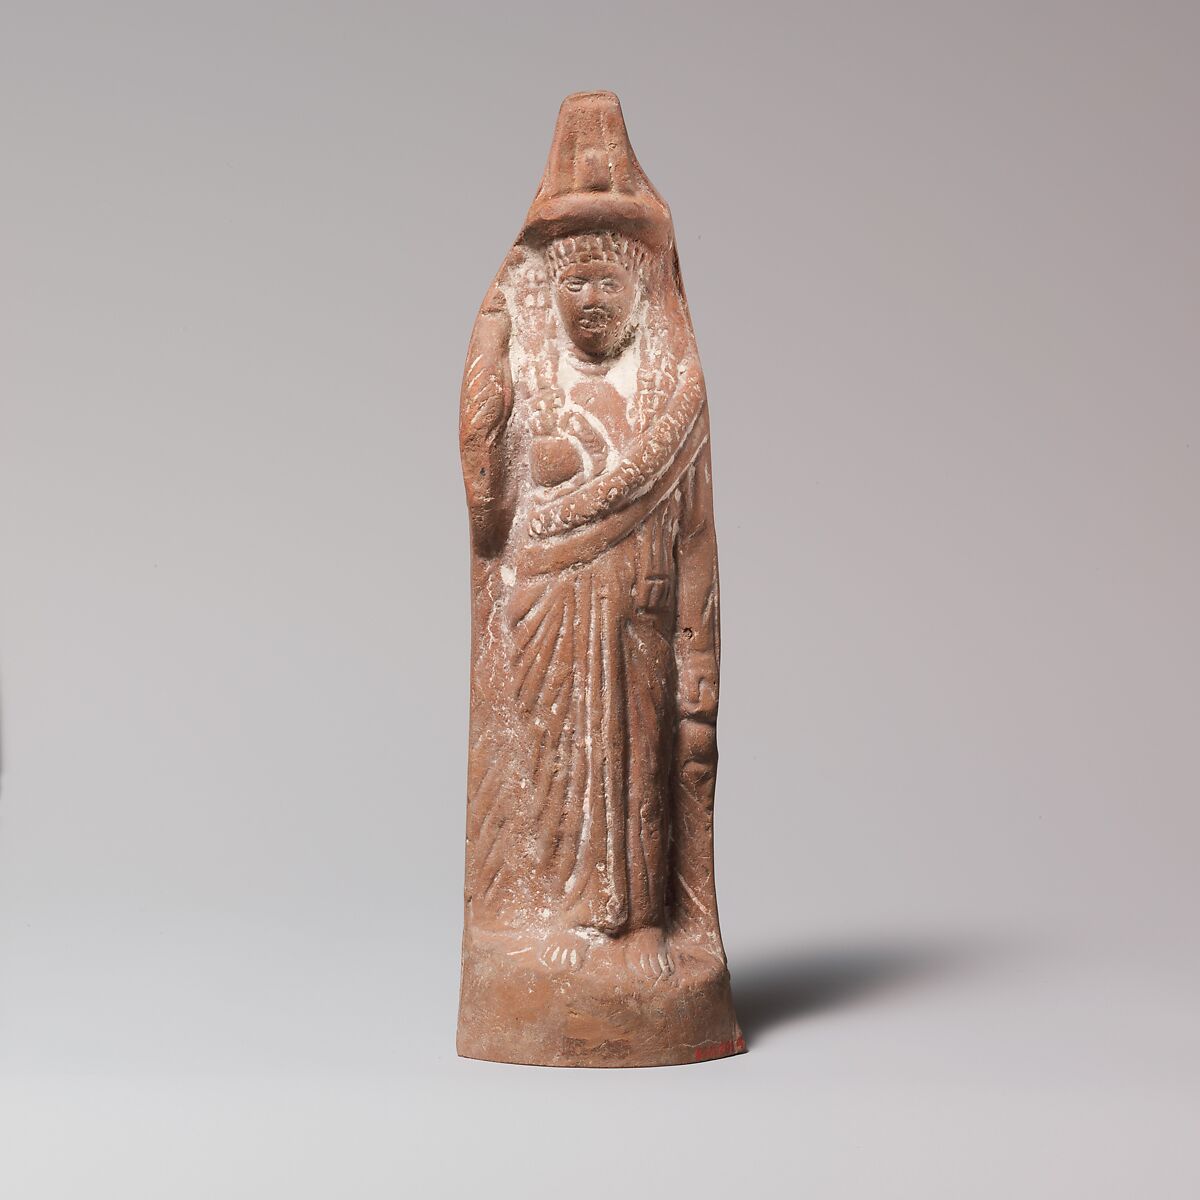 Terracotta statuette of Isis or a follower of her cult, Terracotta, Roman 